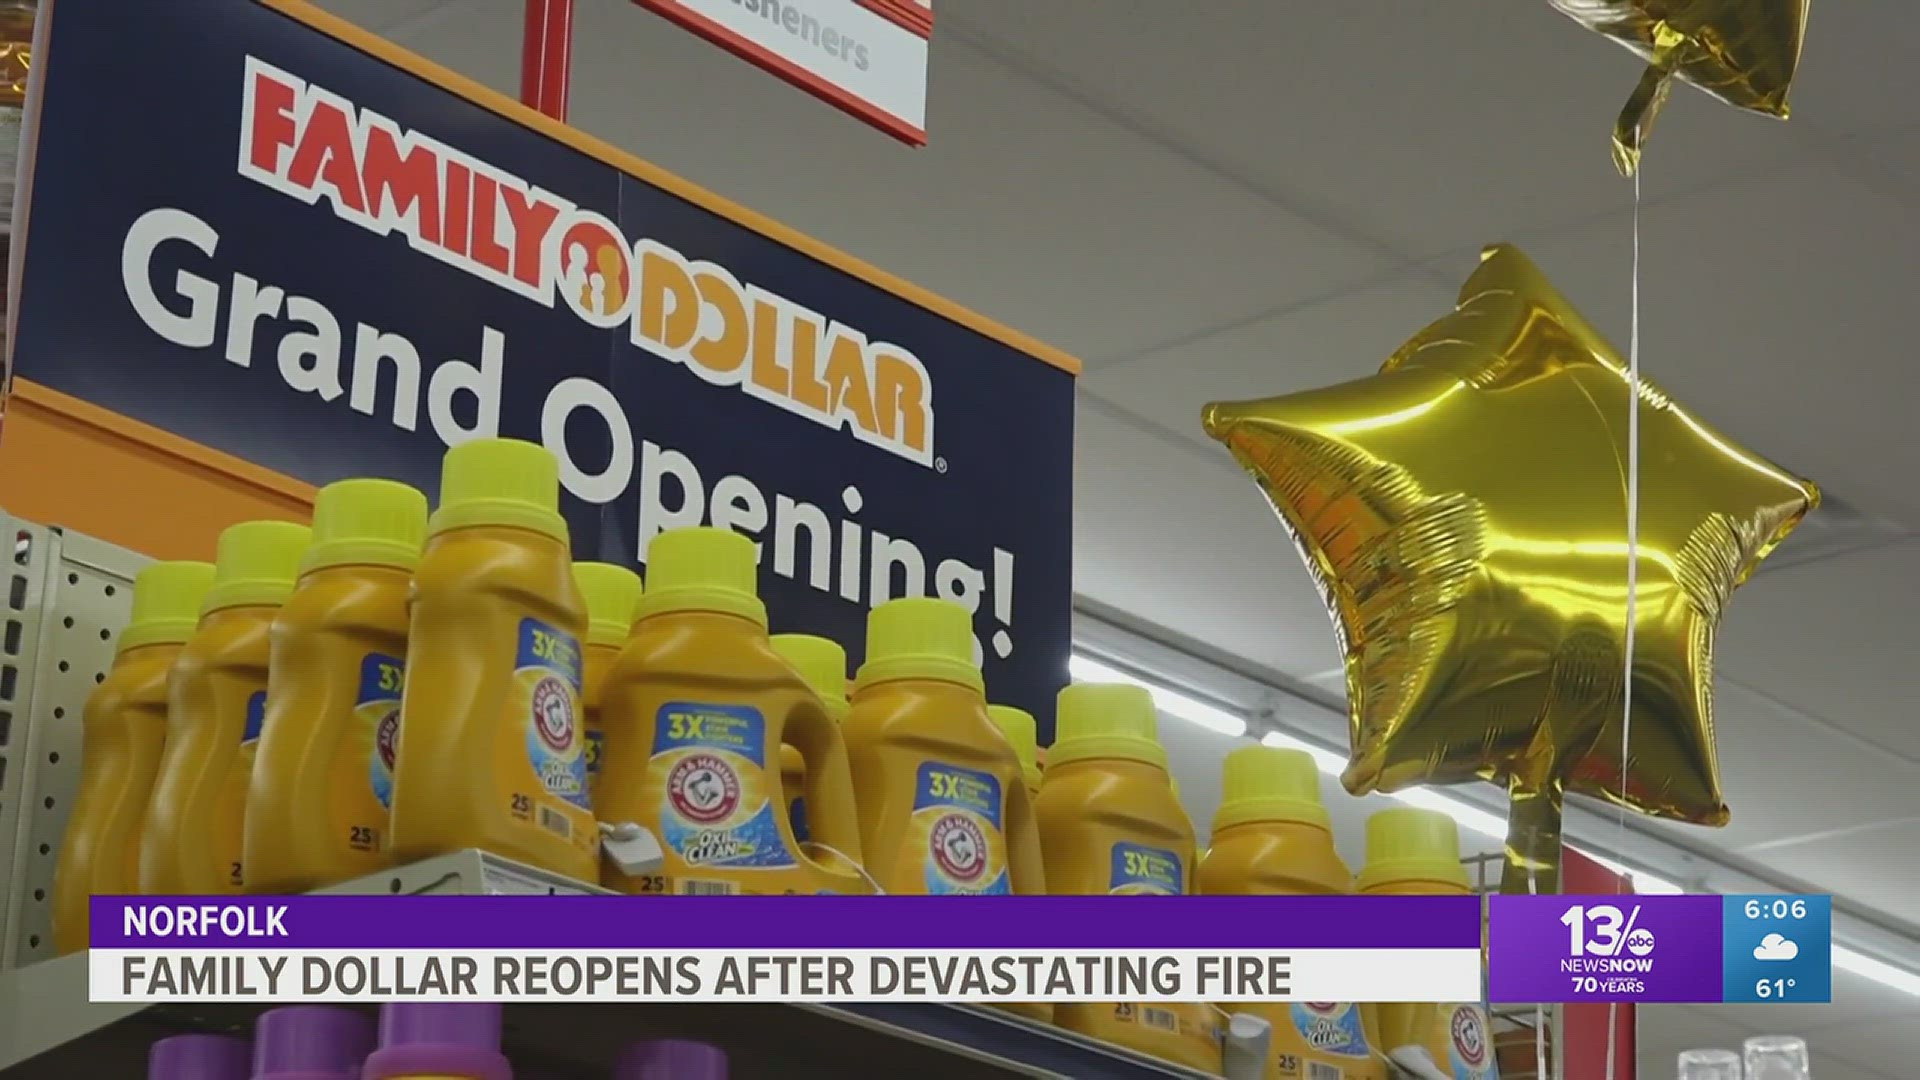 In September 2022 the Family Dollar on Church St. experienced a devastating fire. After a year of renovations, the store is finally back open.